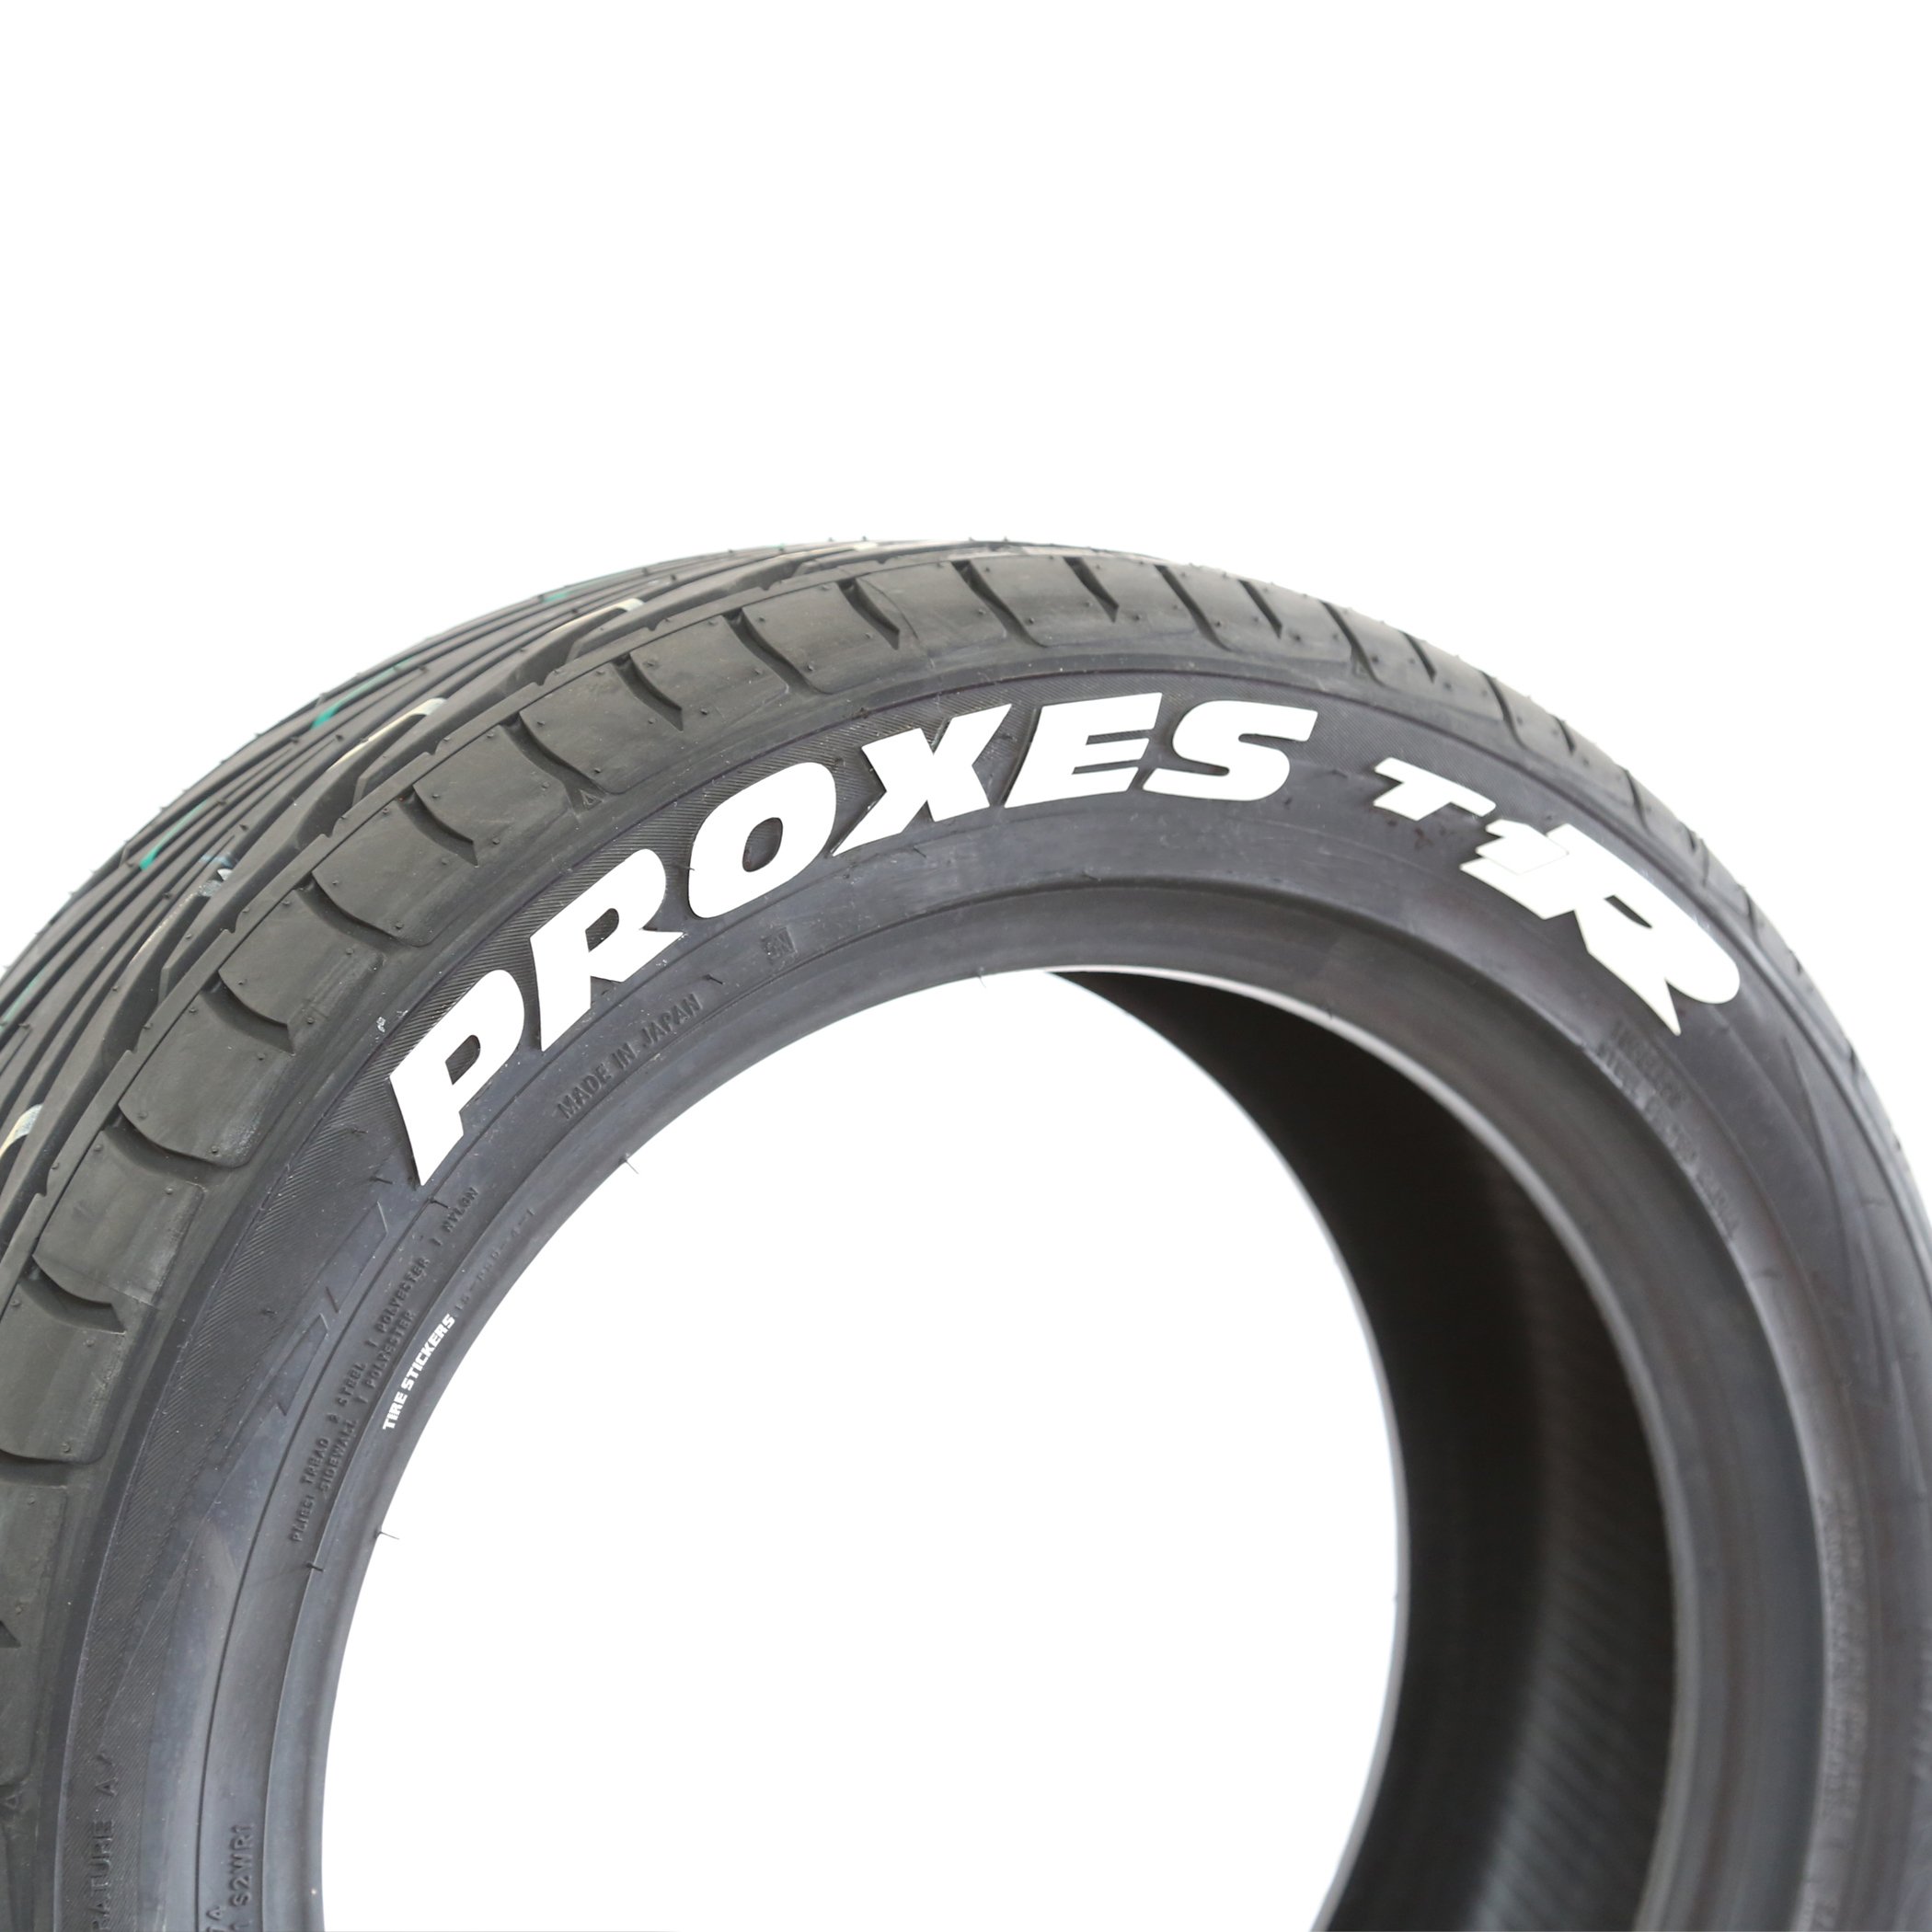 Toyo Tires Proxes T1R White Letter Tire